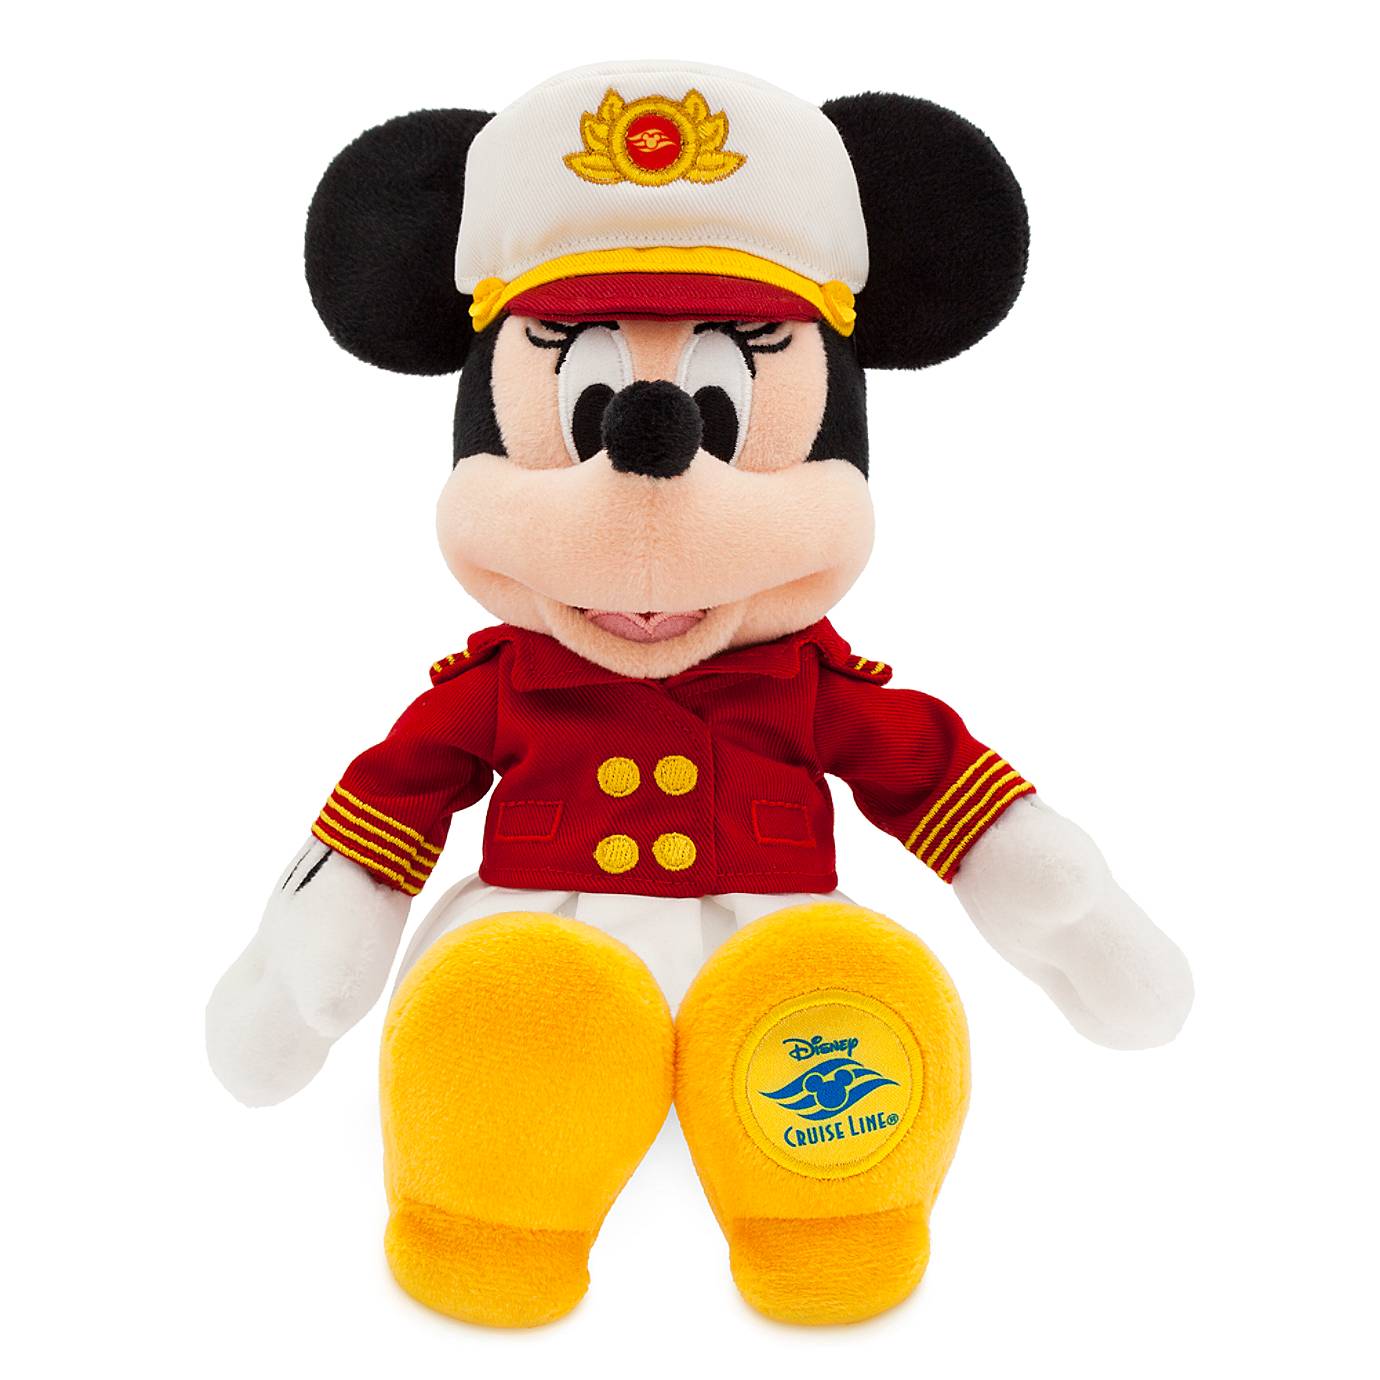 Disney Cruise Line Minnie Captain 11 in Plush New with Tag